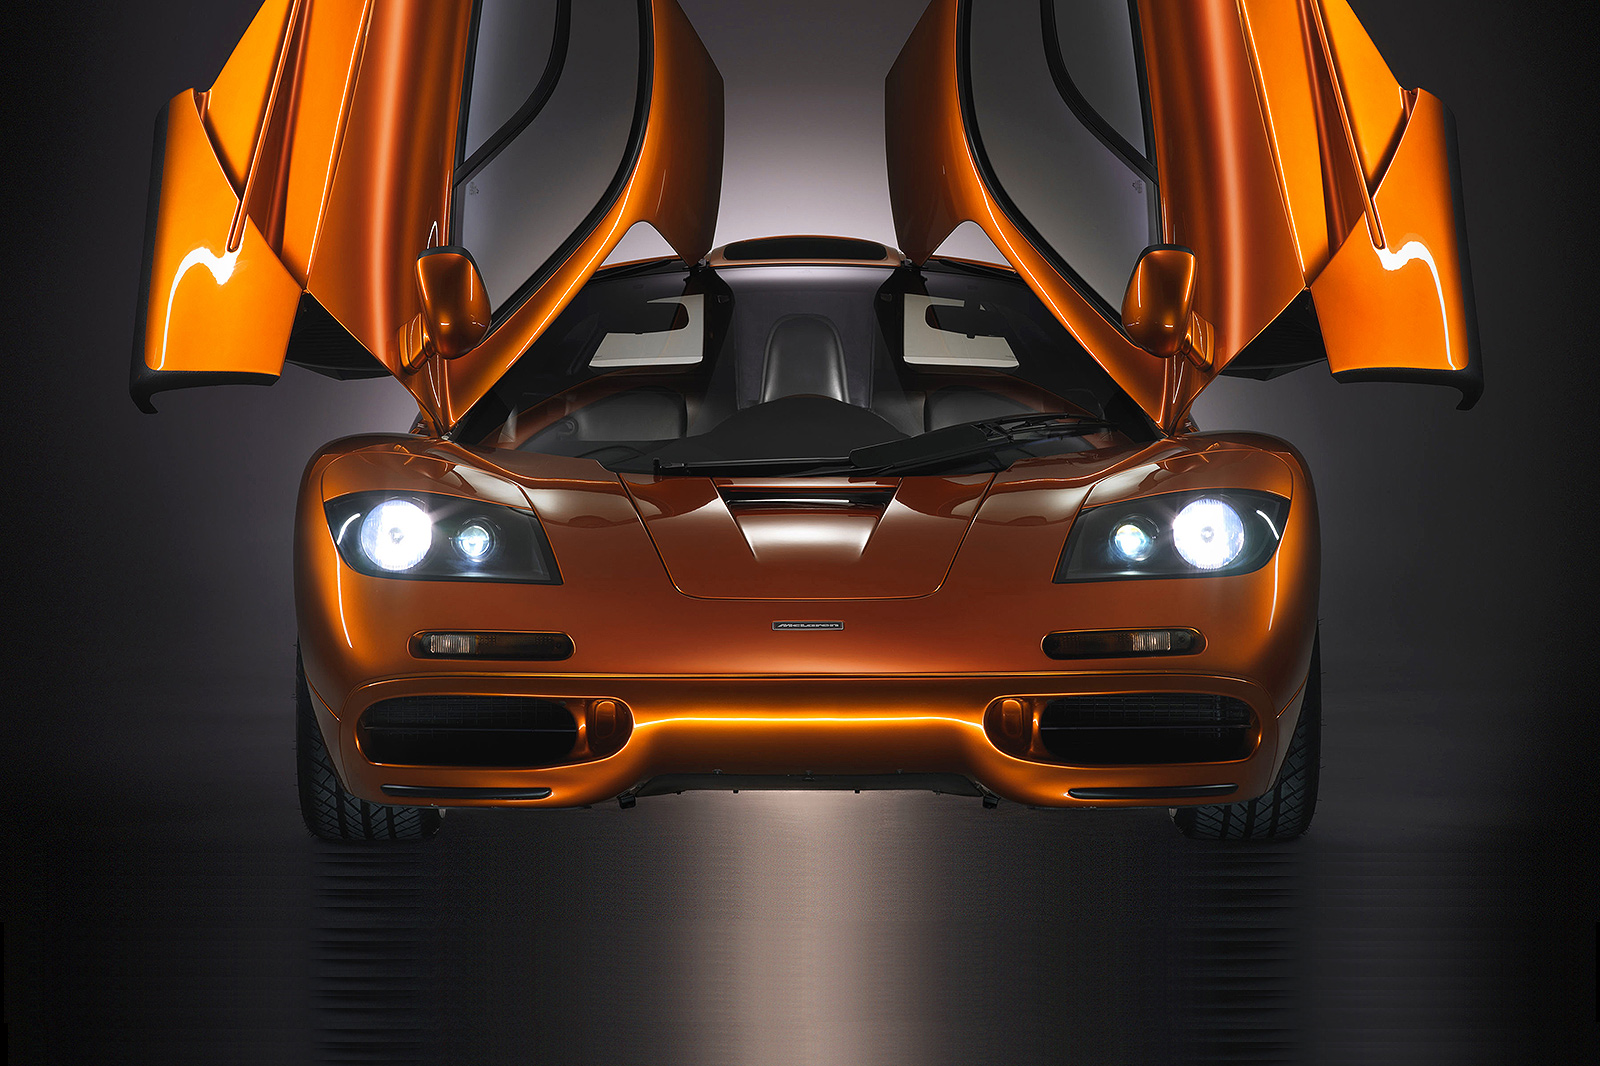 The McLaren F1 GTR described by its “father”, Gordon Murray (video